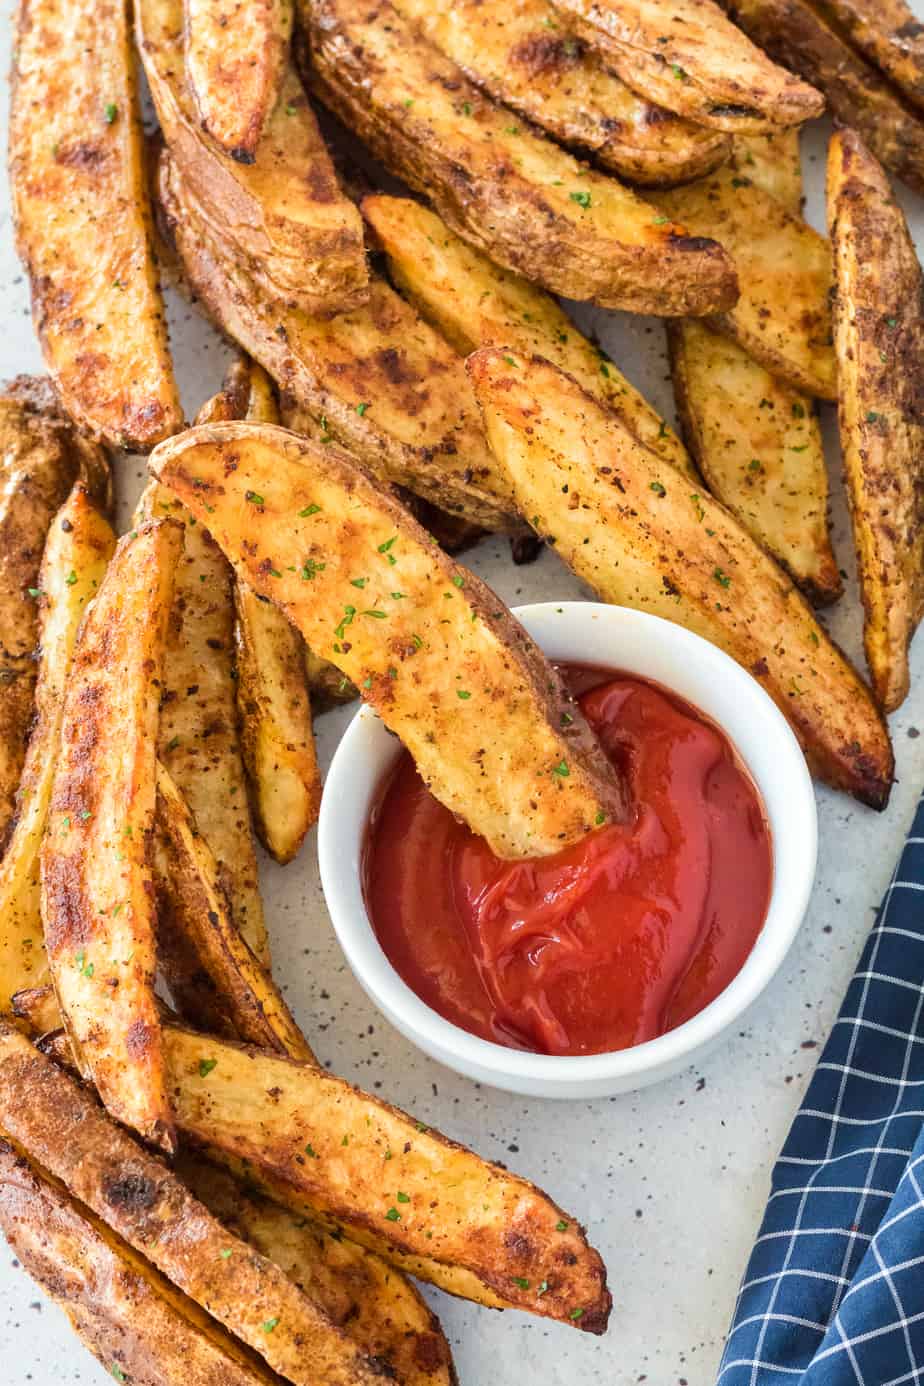 Crispy brown potato wedges piled on a serving platter close up with one potato slice being dipped in a small bowl of ketchup